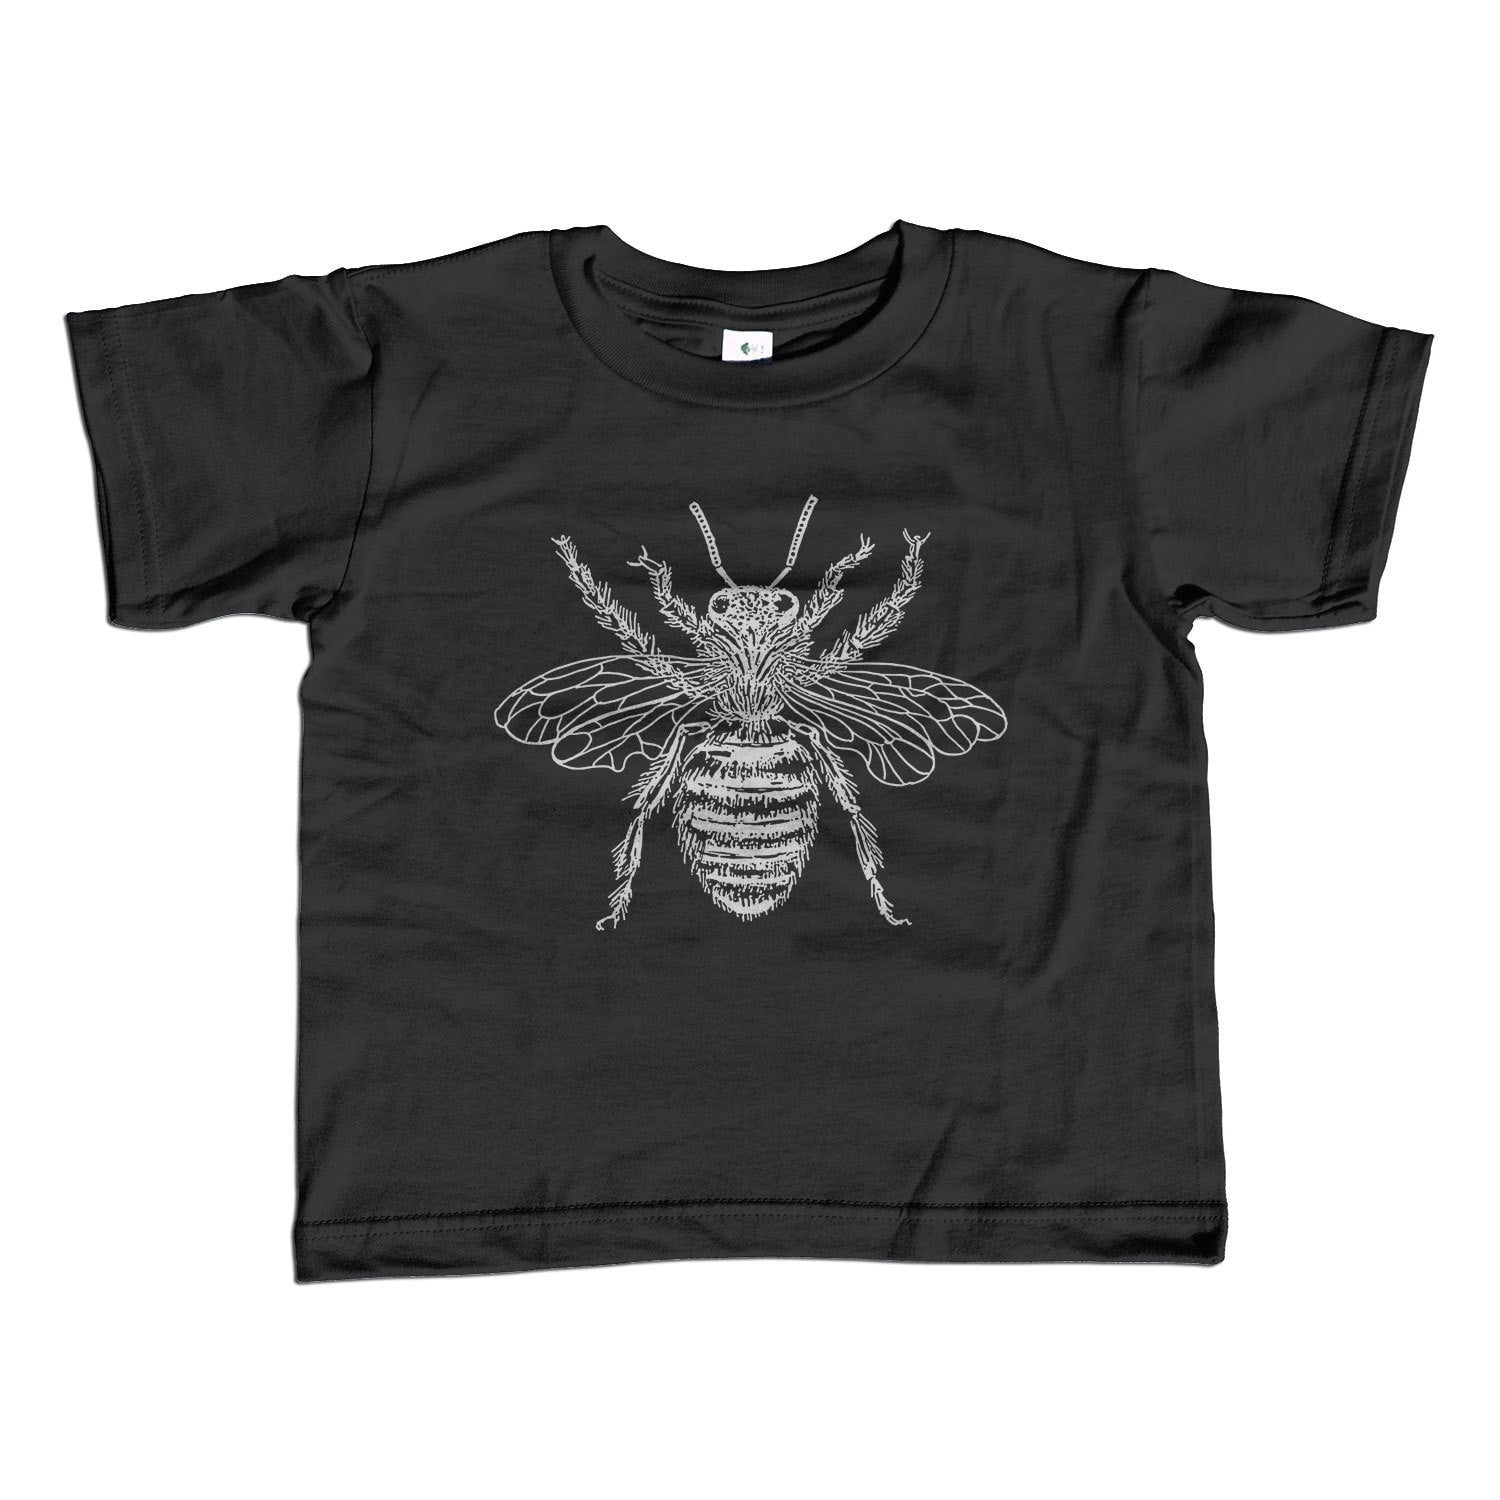 Boy's Bee Insect T-Shirt Hipster Bug Tshirt